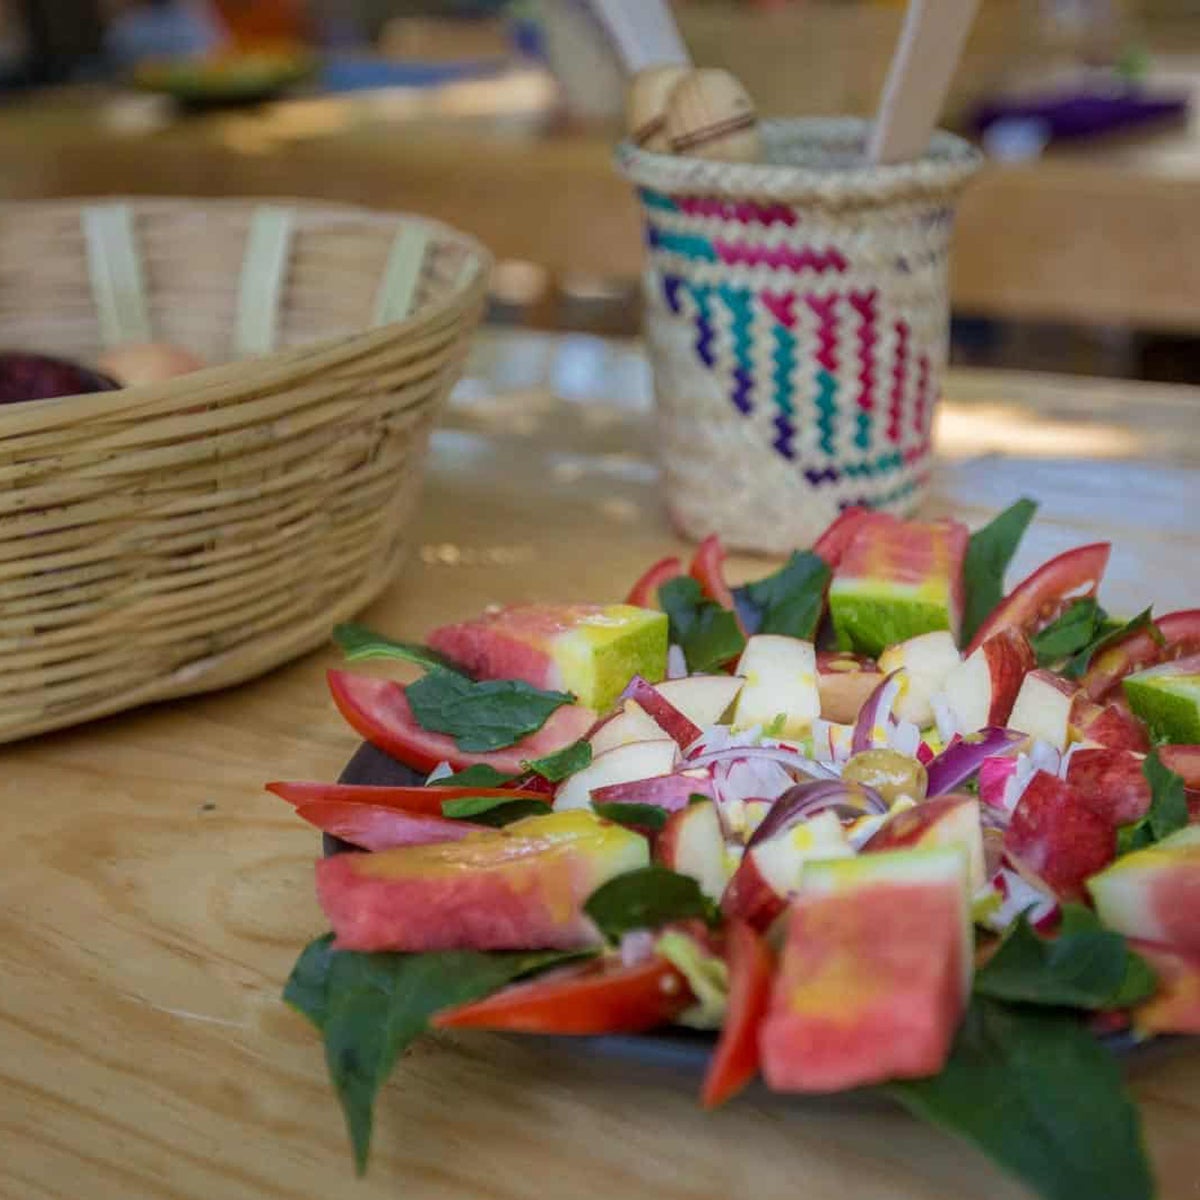 This beautiful salad will provide nutrition to families in Mexico.